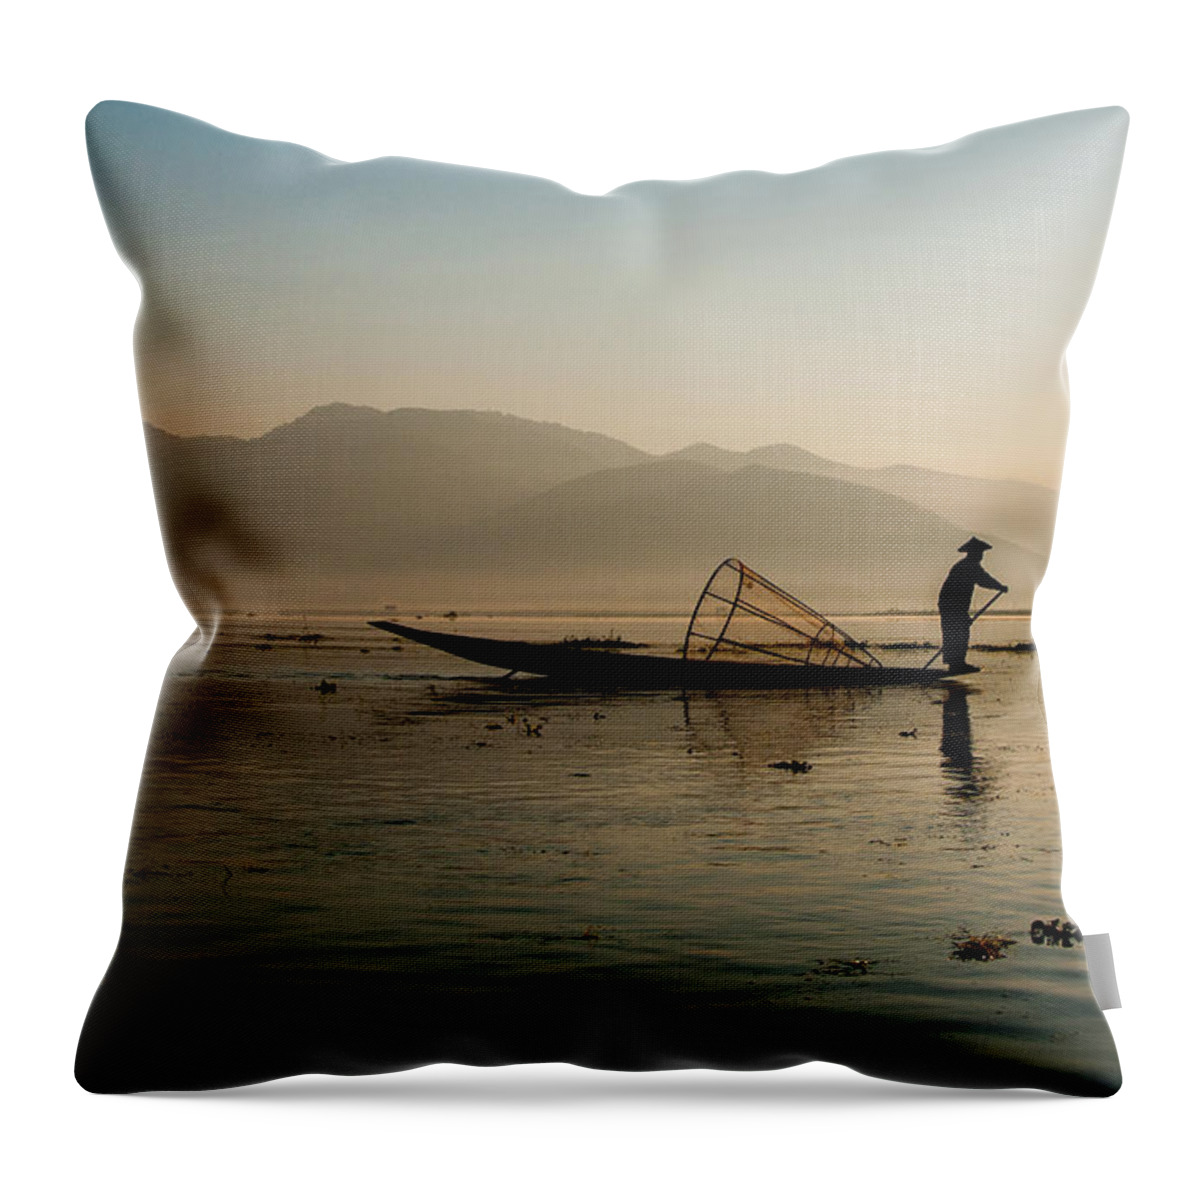 Fisherman Throw Pillow featuring the photograph Fisherman at Inle Lake by Arj Munoz